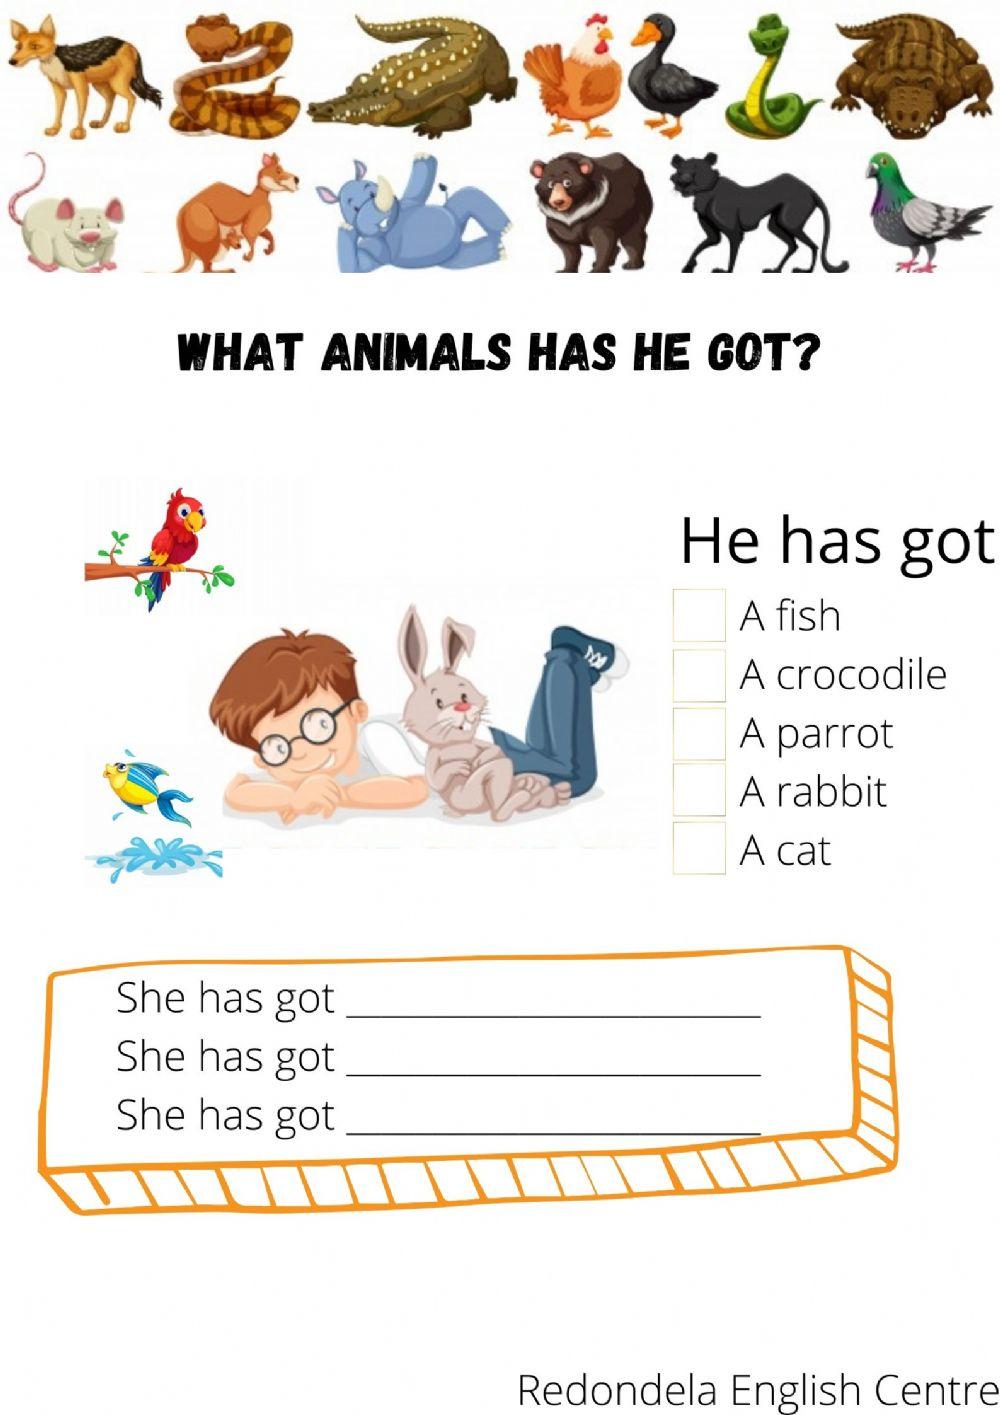 What animals has he got?